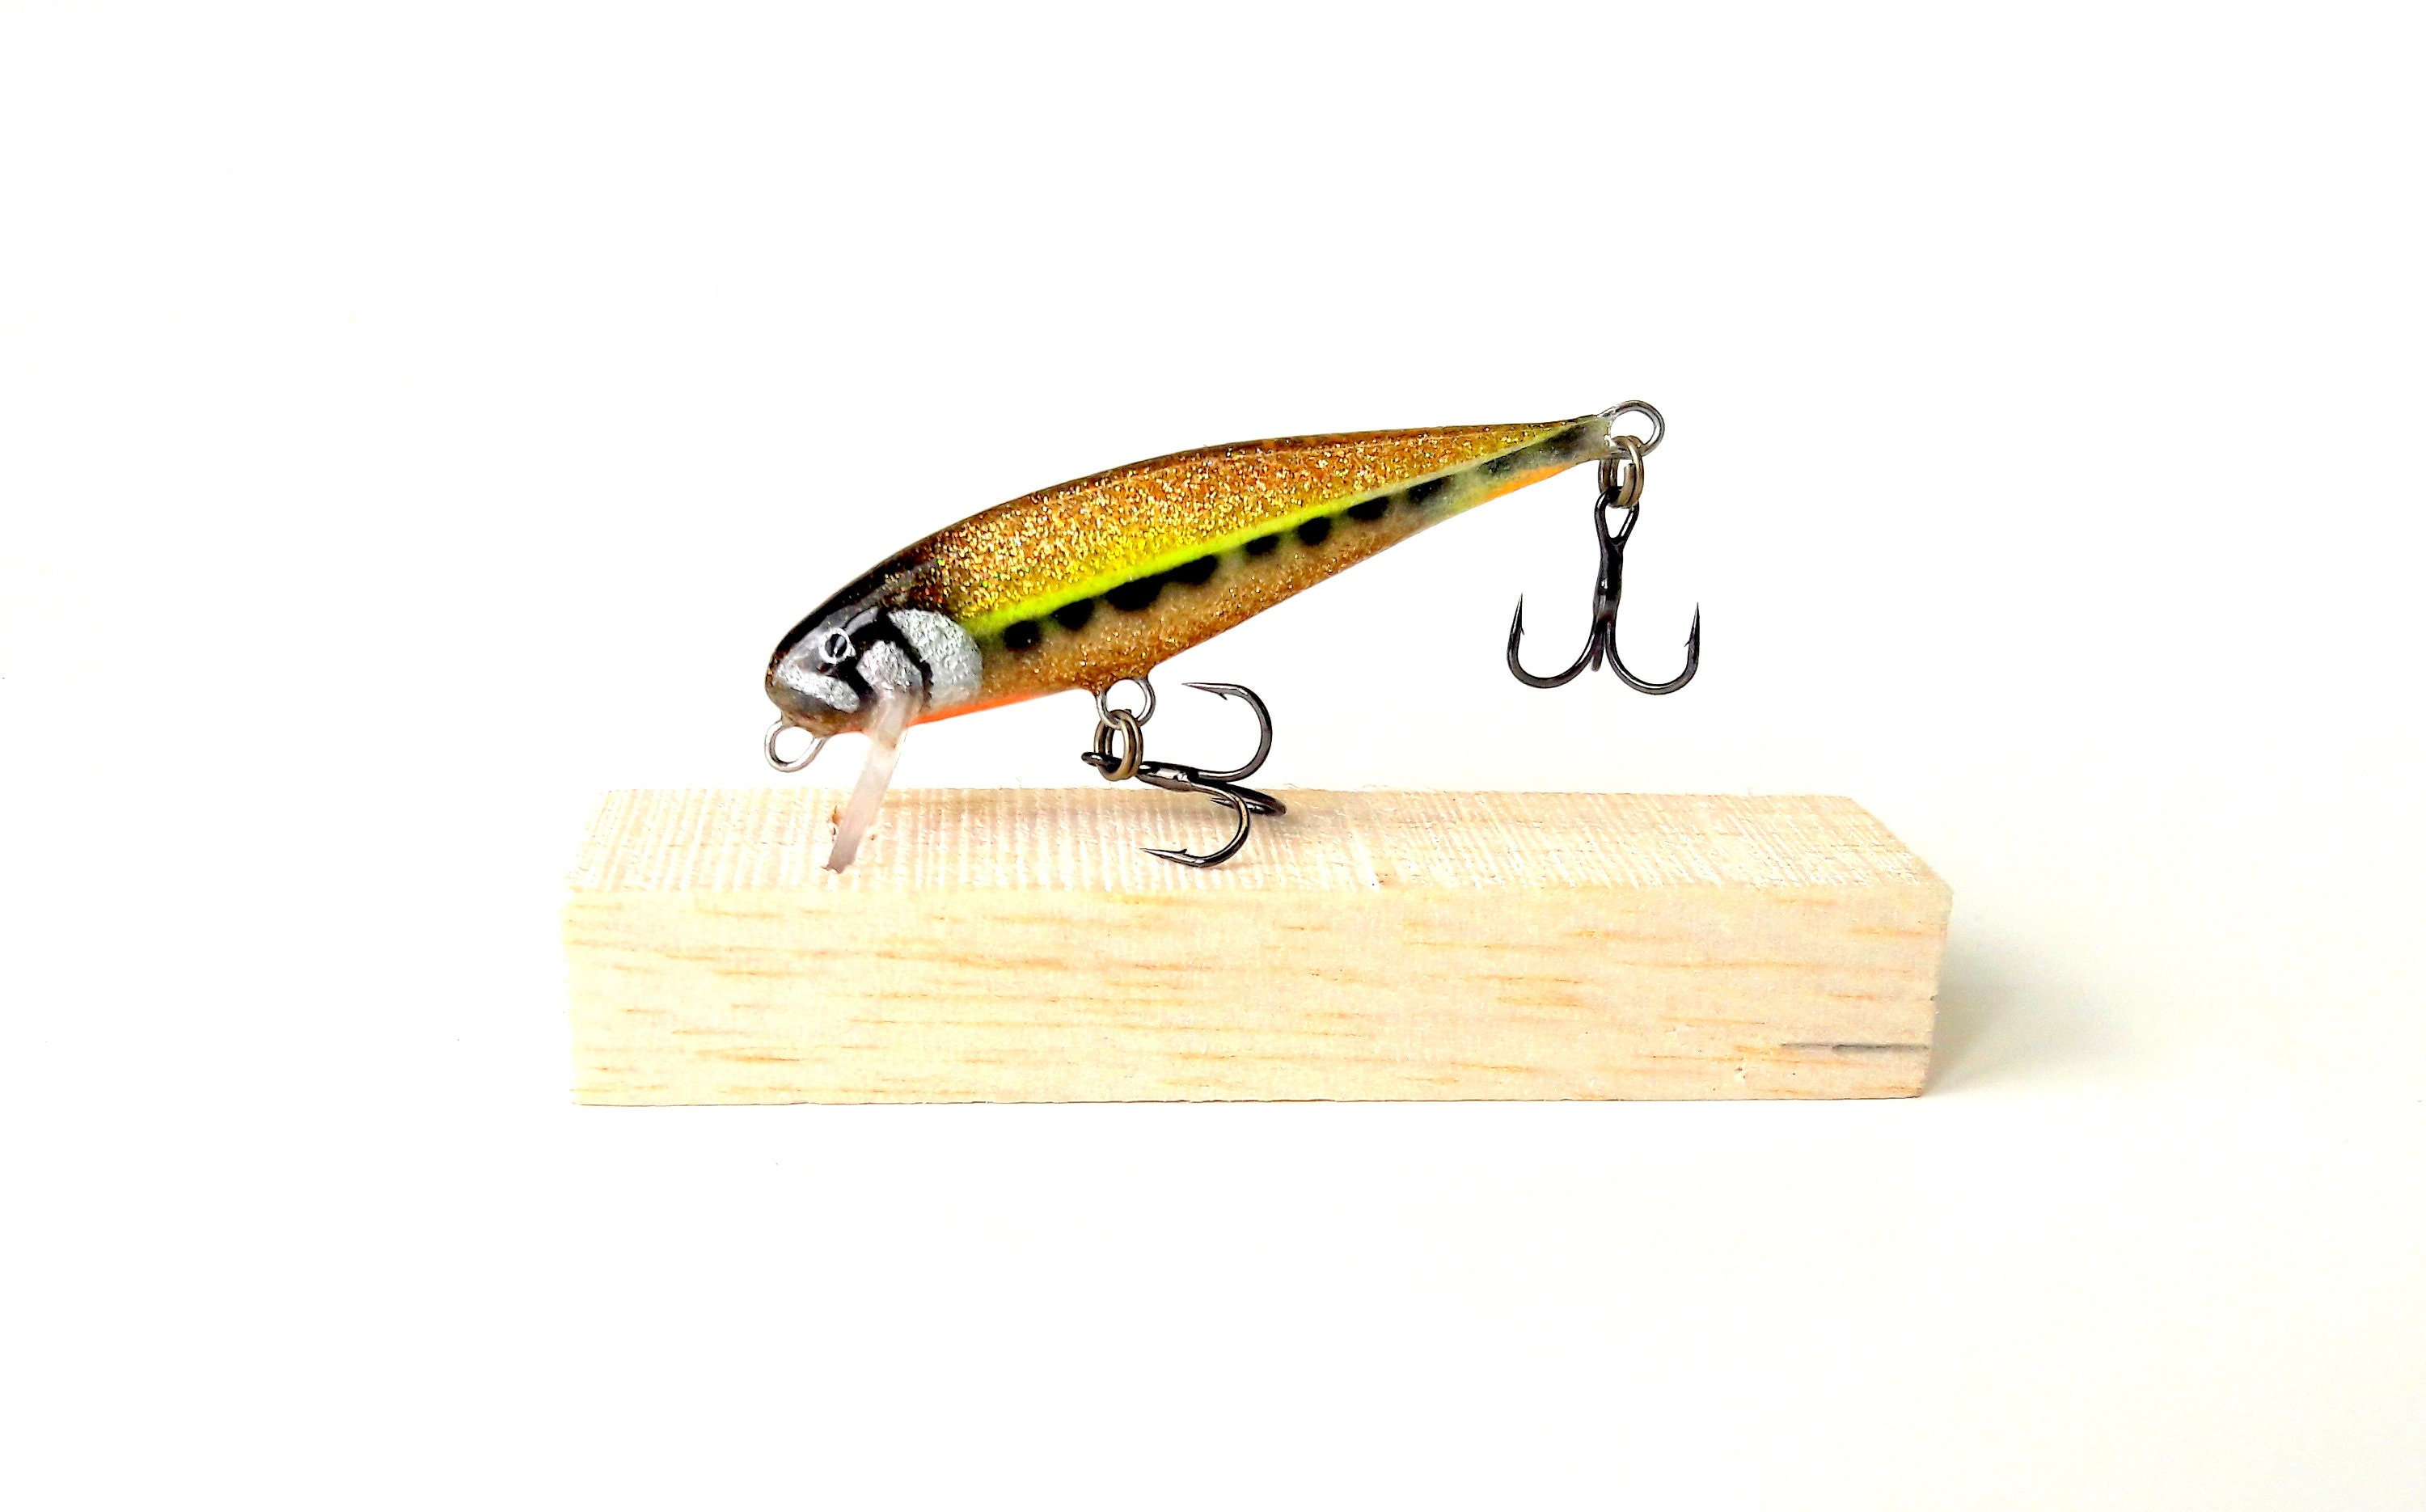 Custom Wooden Handmade Fishing Lure Minnow for Trout 60mm. S 